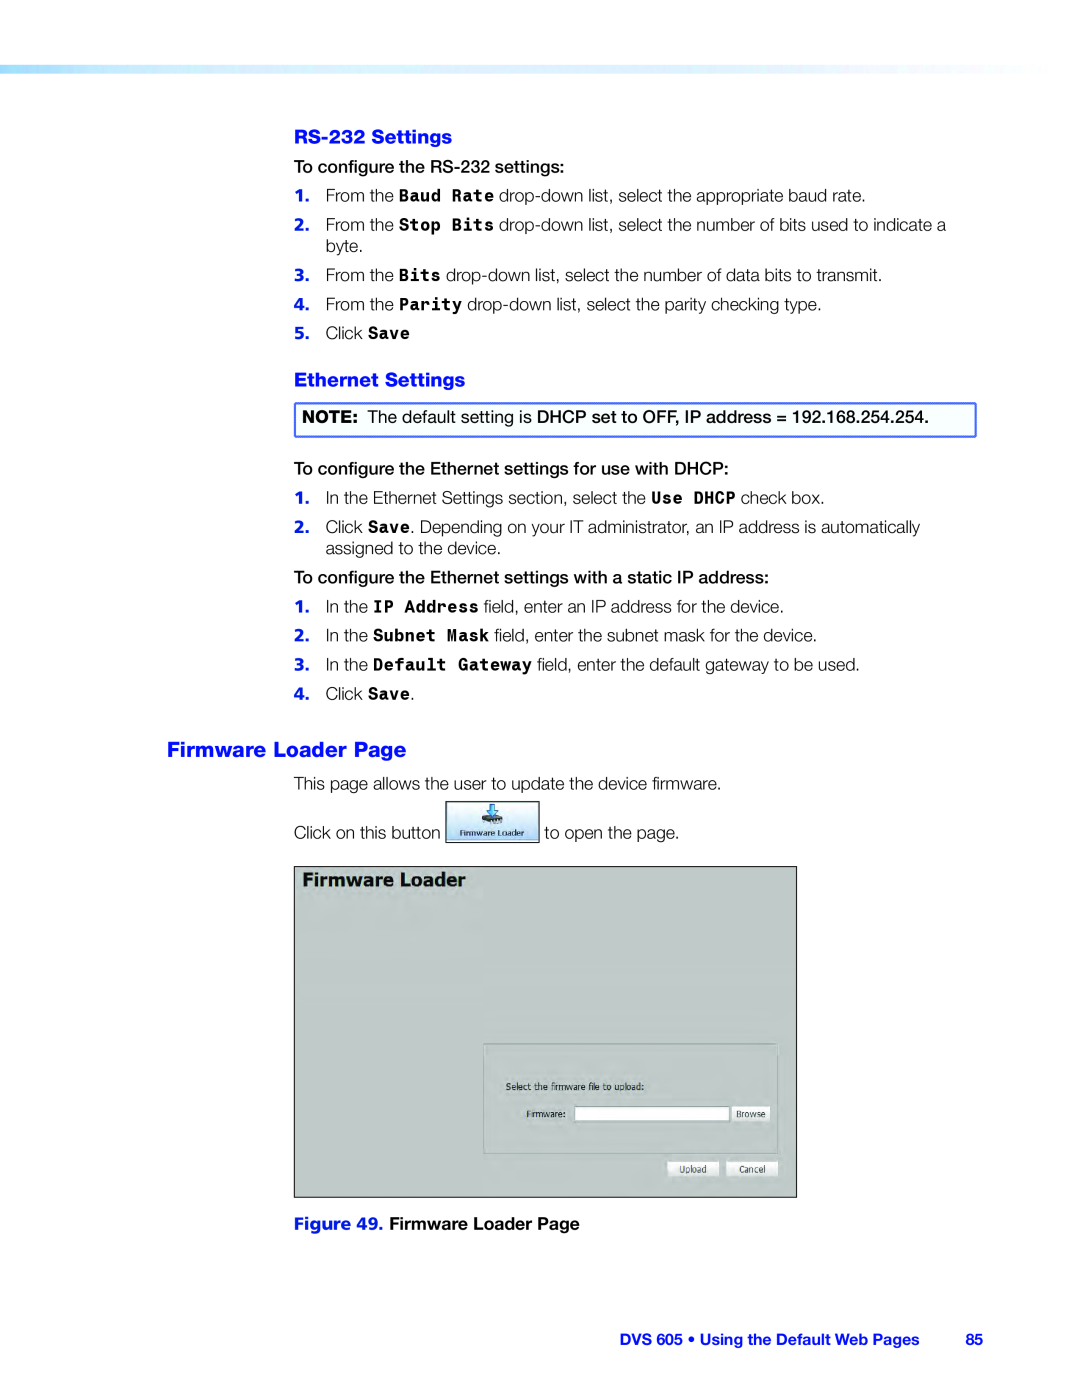 Extron electronic DVS 605 manual Firmware Loader Page, RS-232Settings, Ethernet Settings 